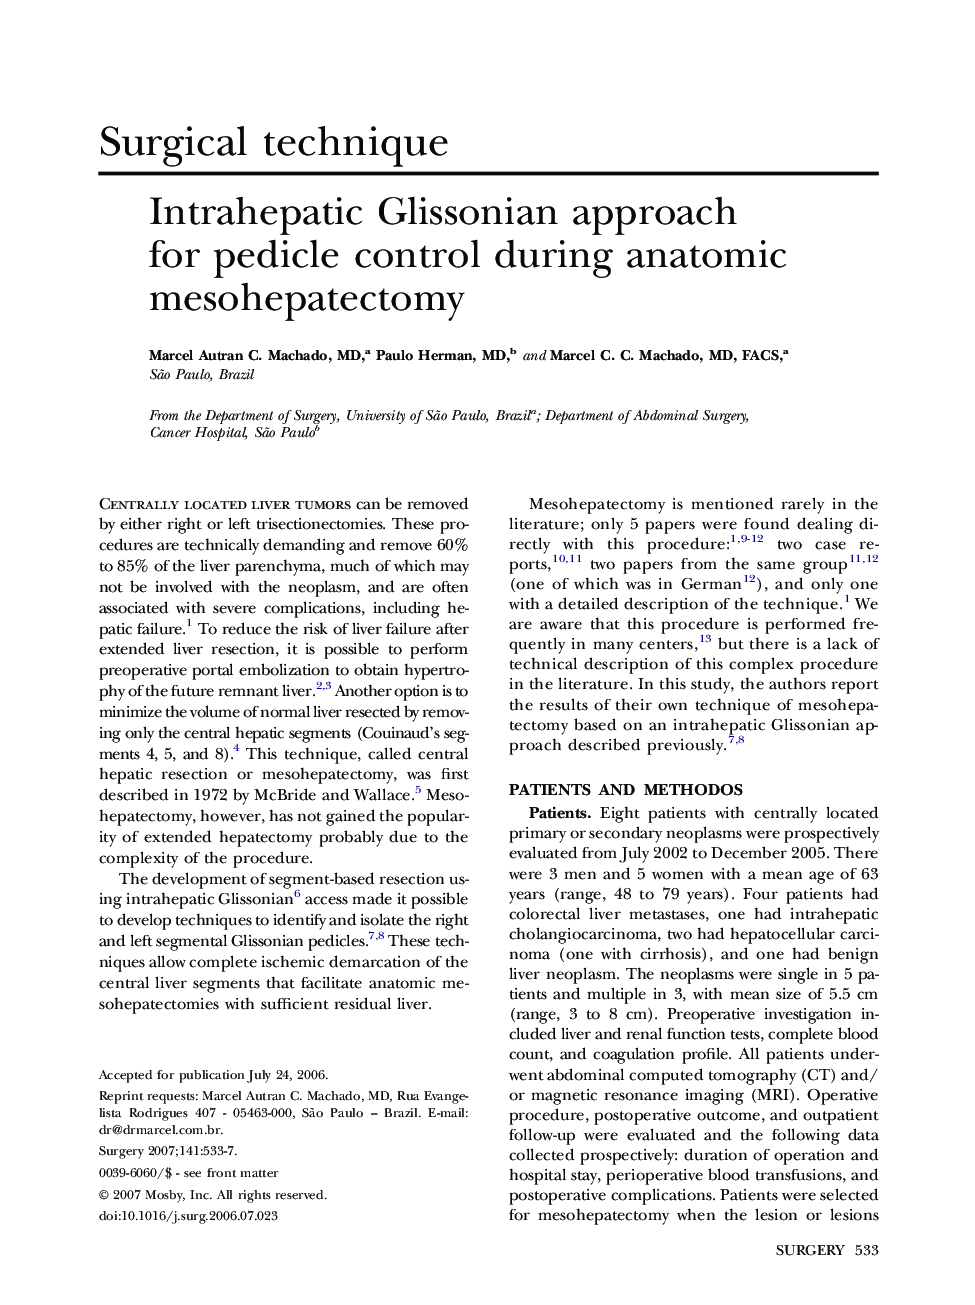 Intrahepatic Glissonian approach for pedicle control during anatomic mesohepatectomy